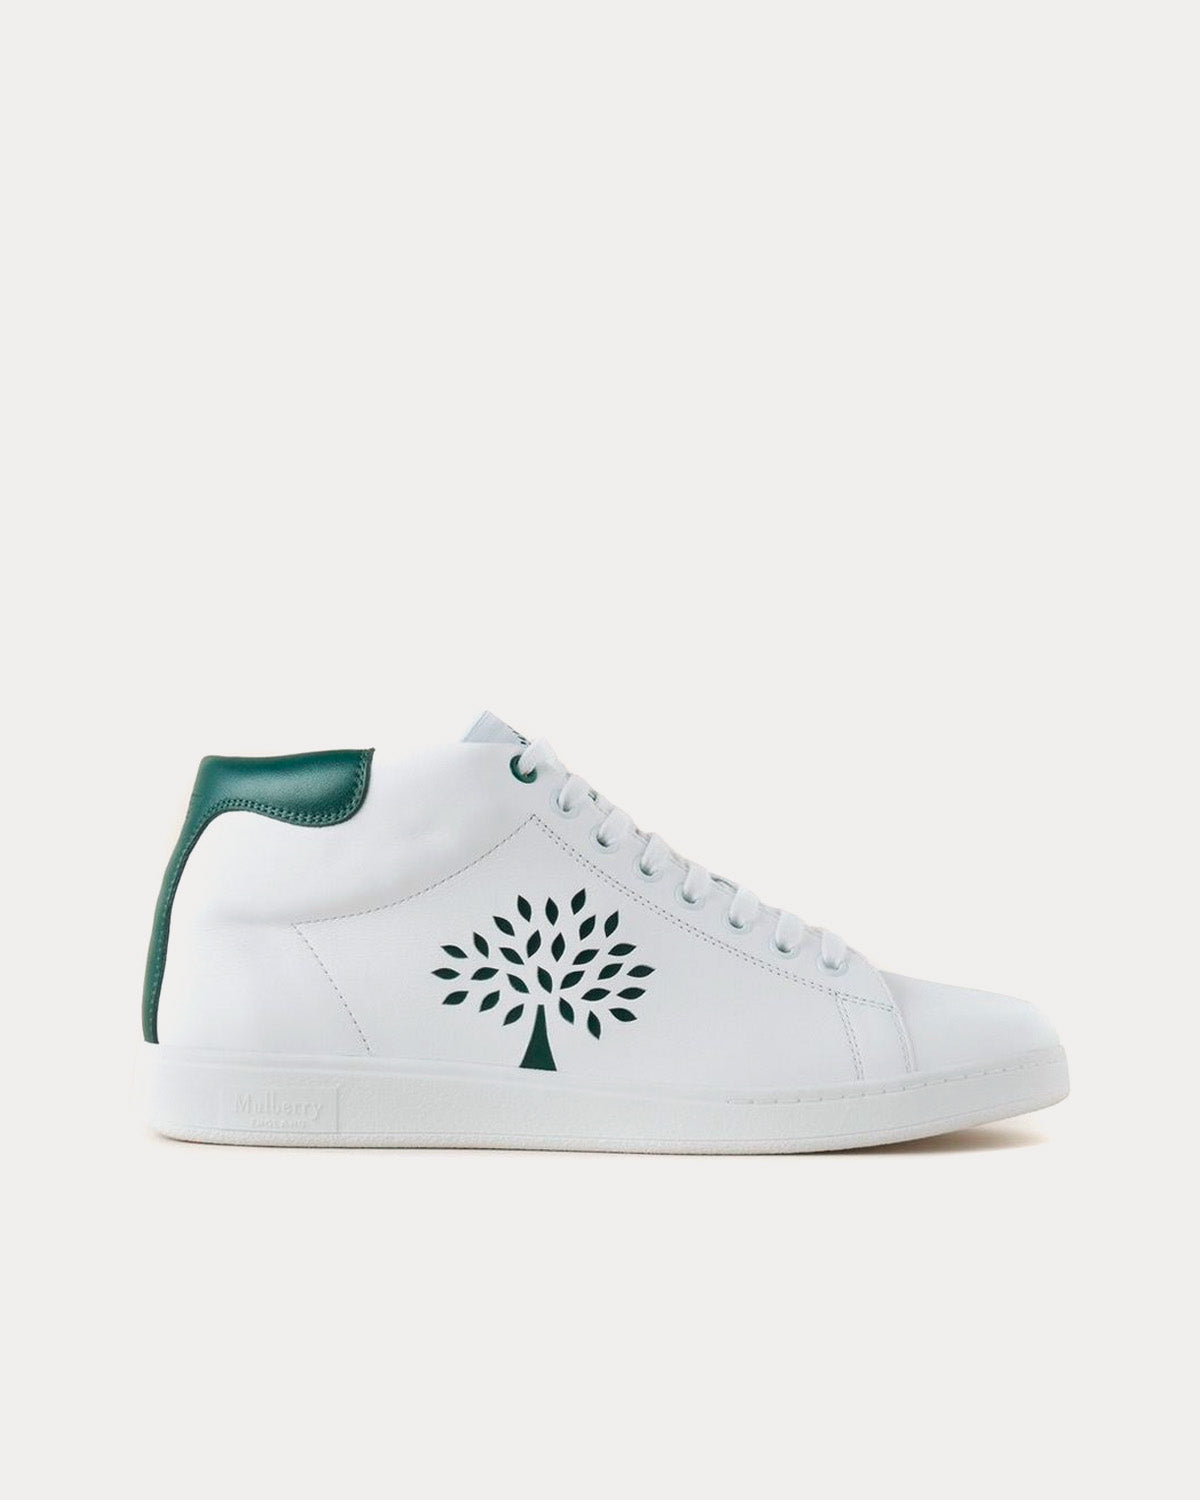 Mulberry - Tree Tennis Leather Mulberry Green High Top Sneakers